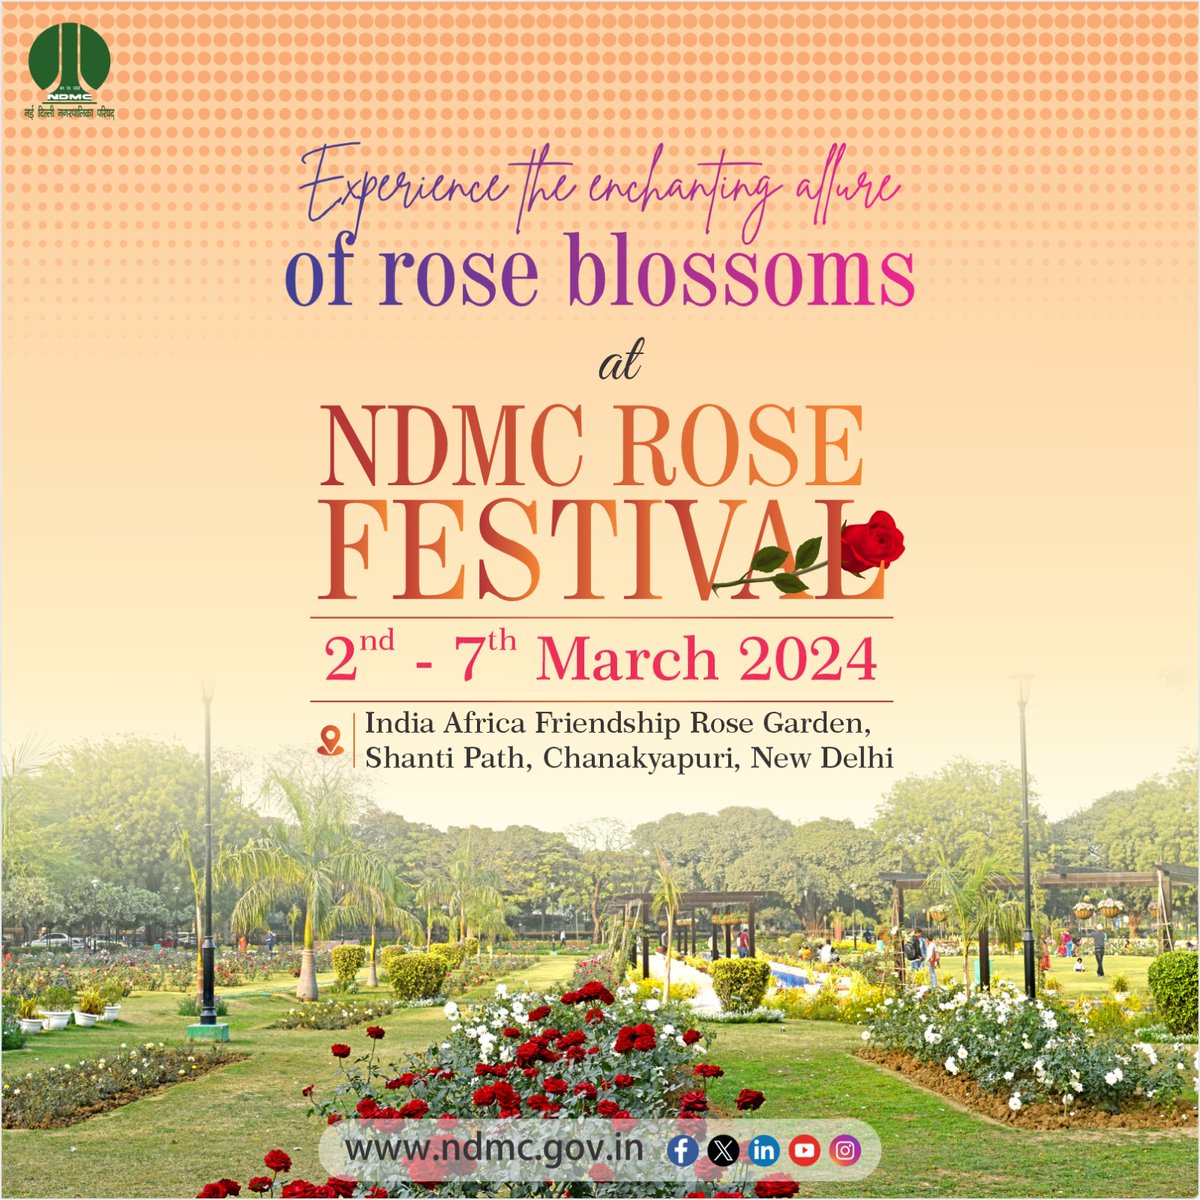 After successful completion of #TulipFestival, NDMC is now organizing the Rose Festival from 2nd to 7th March 2024 at India Africa Friendship Rose Garden, Shanti Path, Chanakyapuri, New Delhi. #NDMCRoseFestival